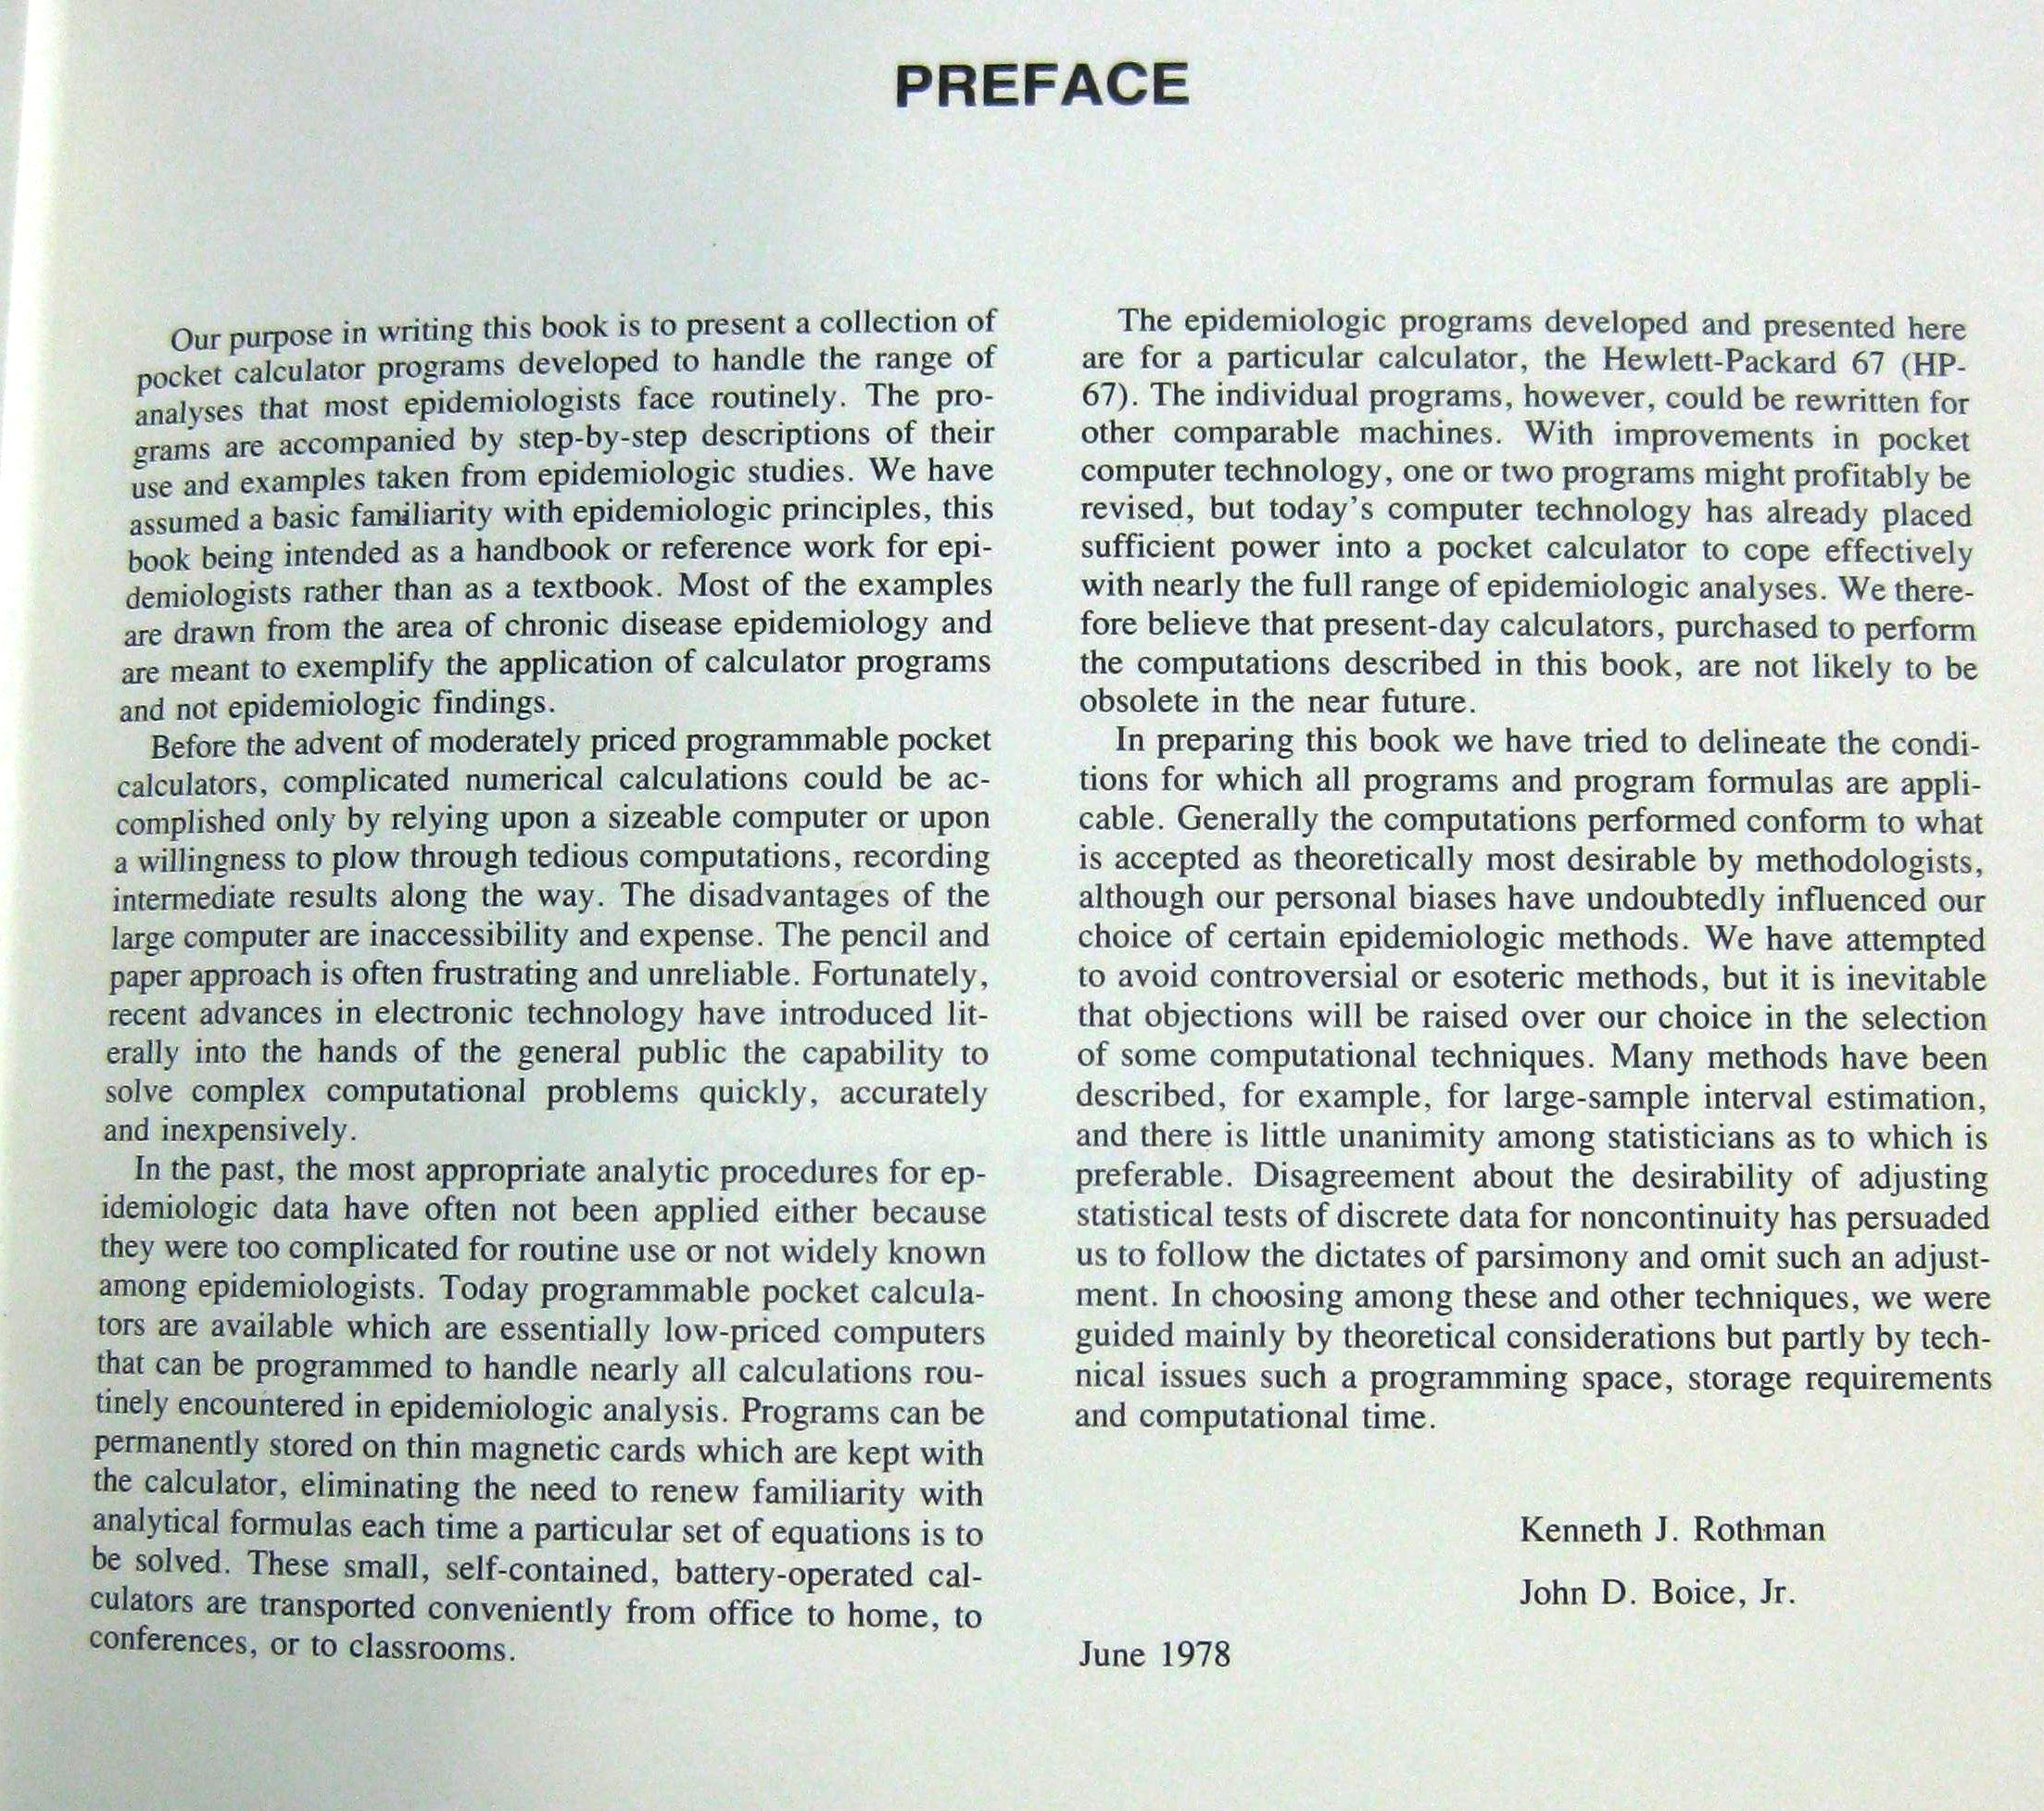 Preface of the book